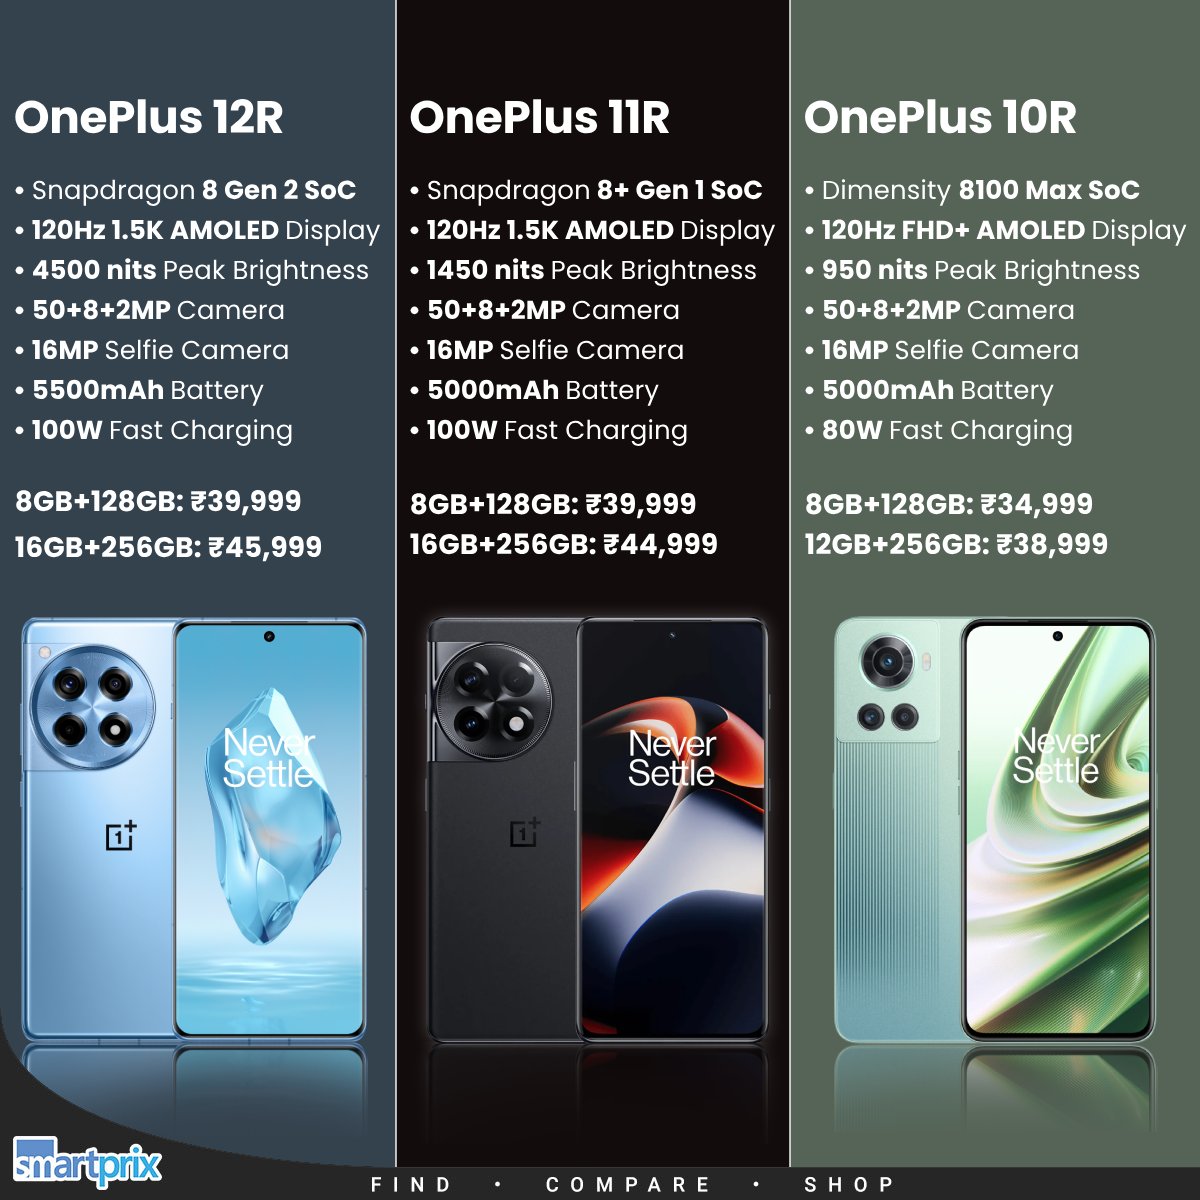 OnePlus 12R: Price, Specifications – Dutchiee